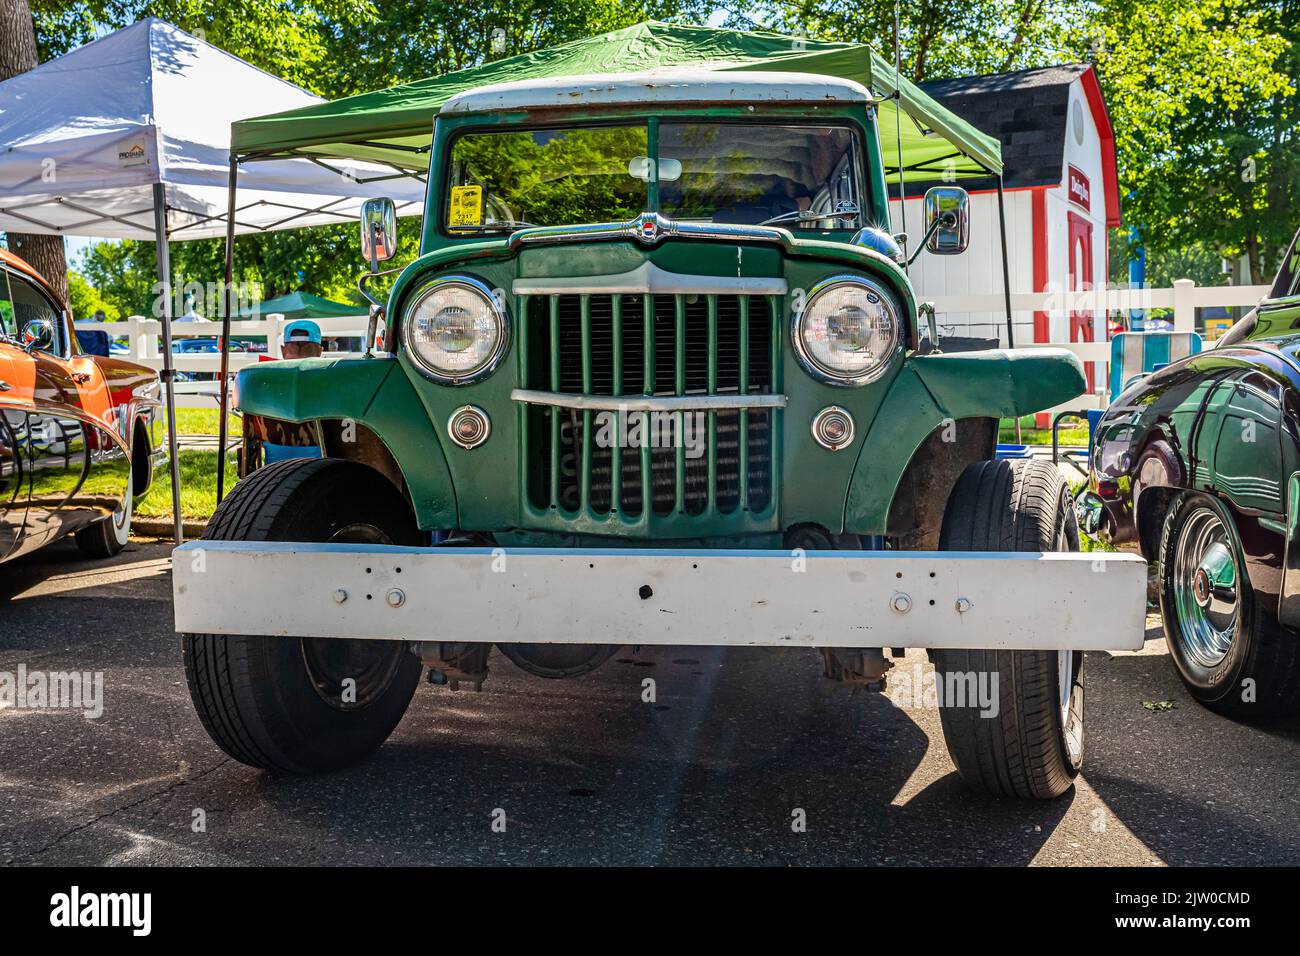 Falcon Heights, MN - June 17, 2022: Low perspective front view of a1954 Willys Overland Station Wagon at a local car show. Stock Photo